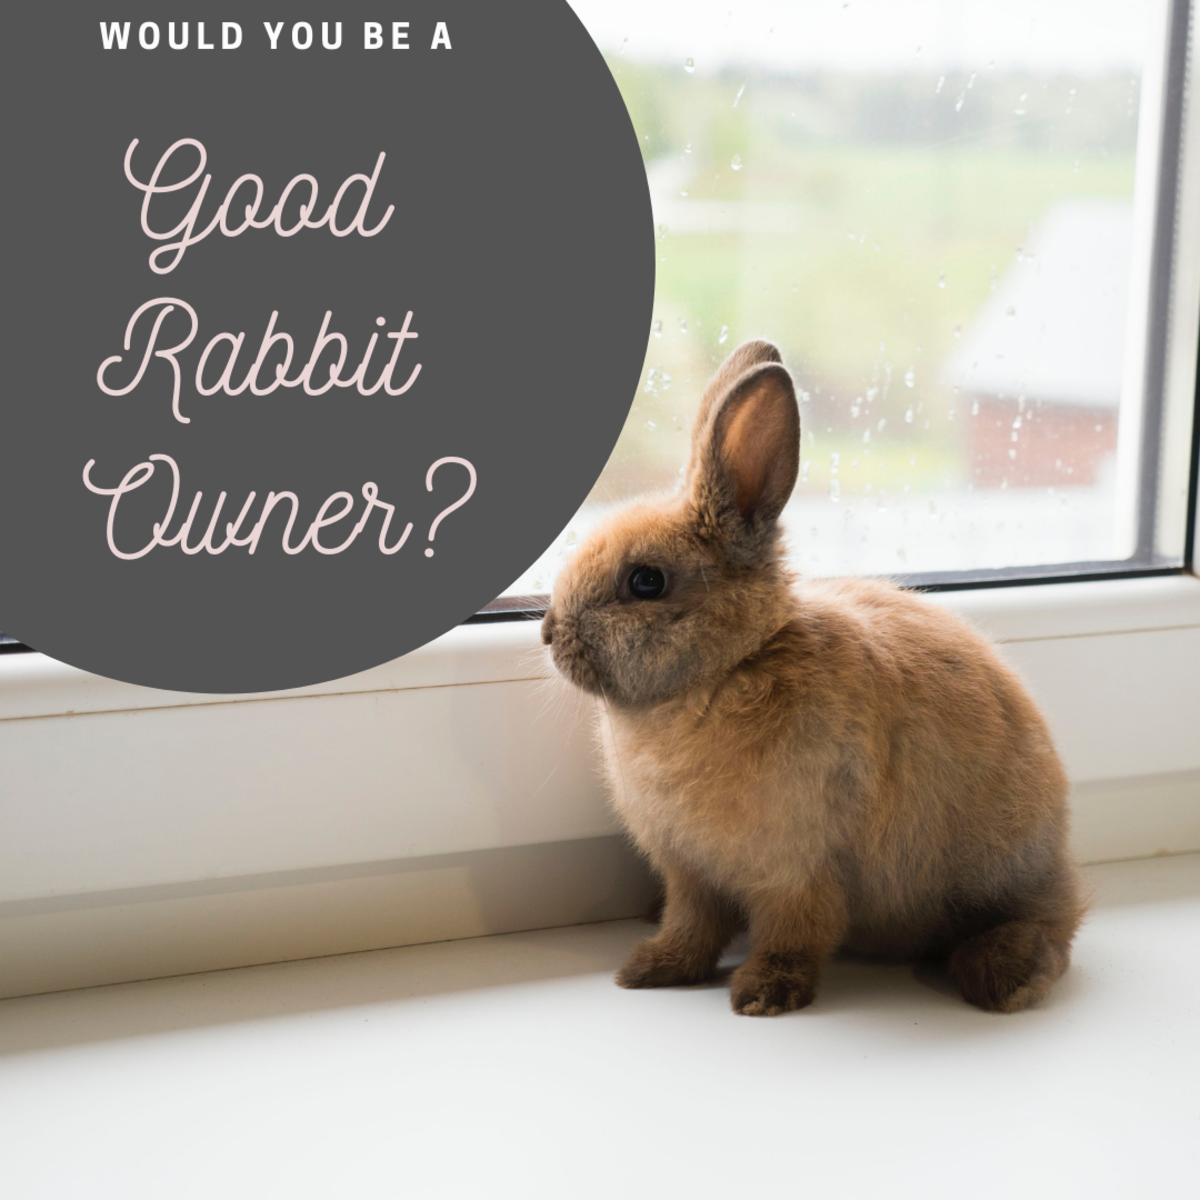 It's important to consider whether you're ready to be a responsible rabbit owner before adopting one. 